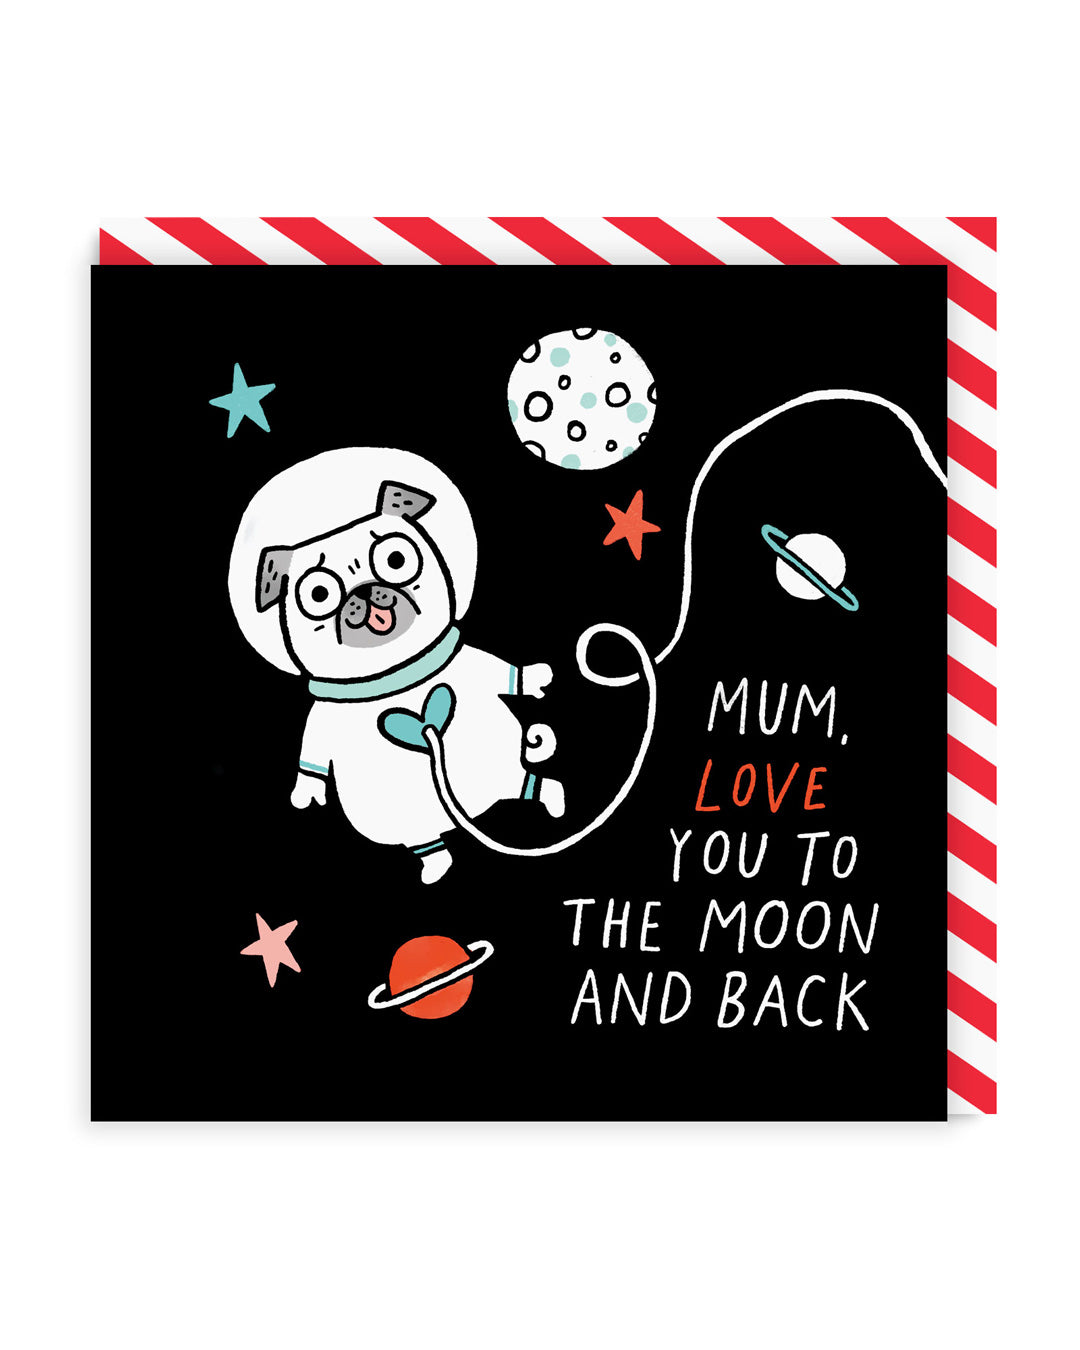 Mum Love You To The Moon and Back Greeting Card